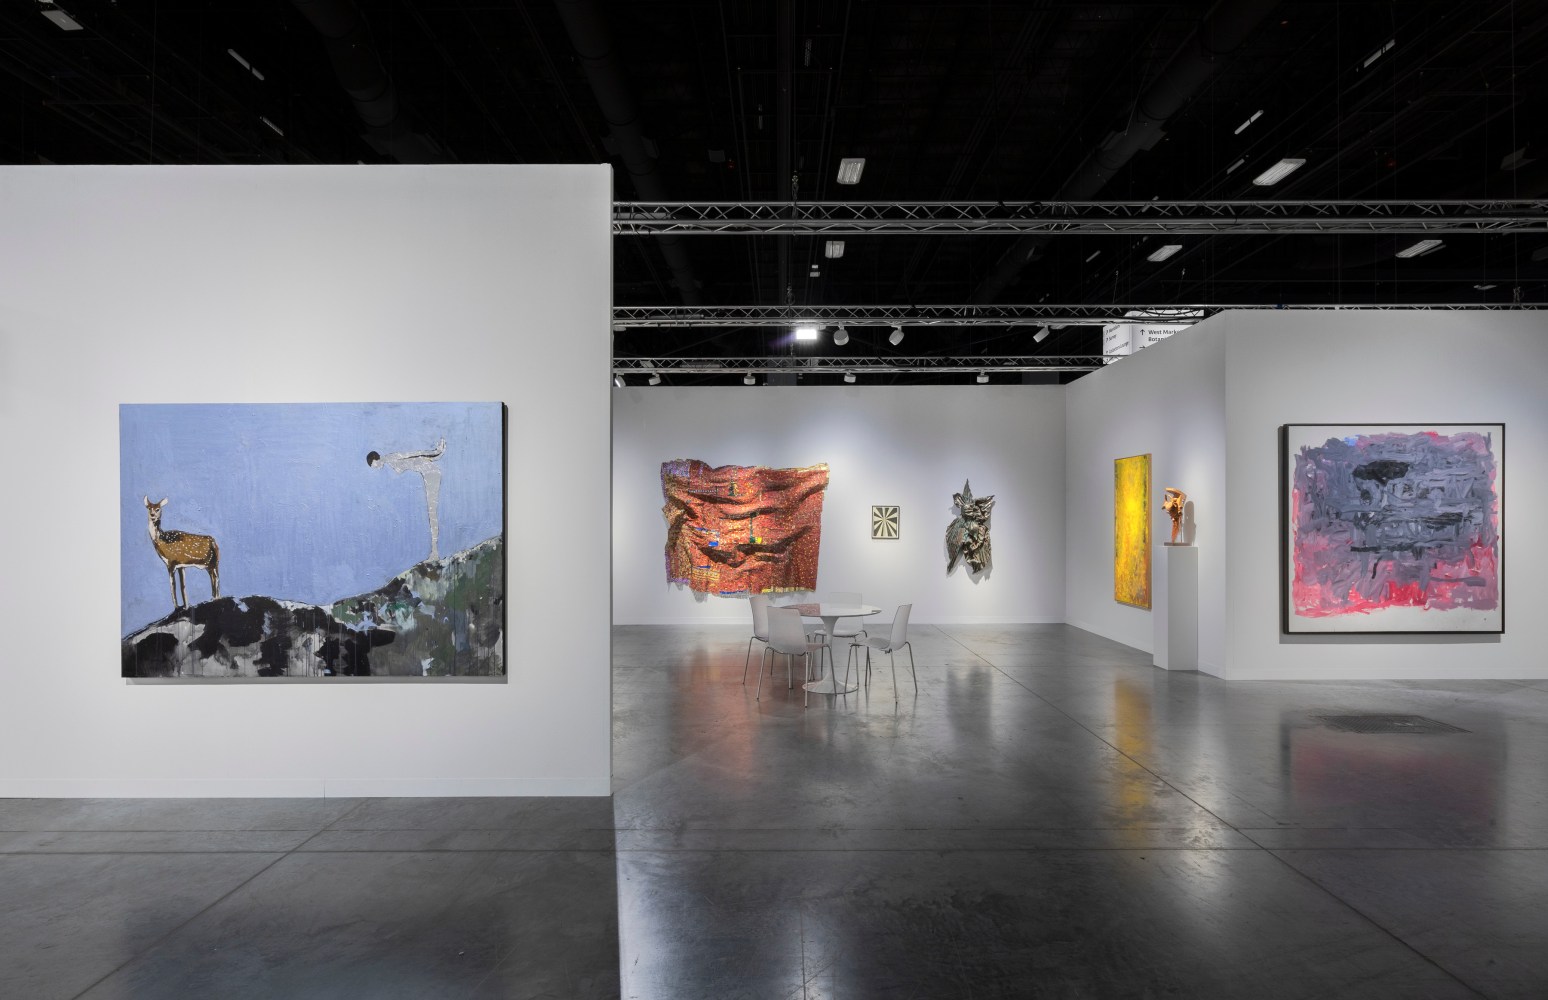 Installation views of Art Basel Miami Beach 2021, Booth C8, at the Miami Beach Convention Center. Photography by Dawn Blackman.